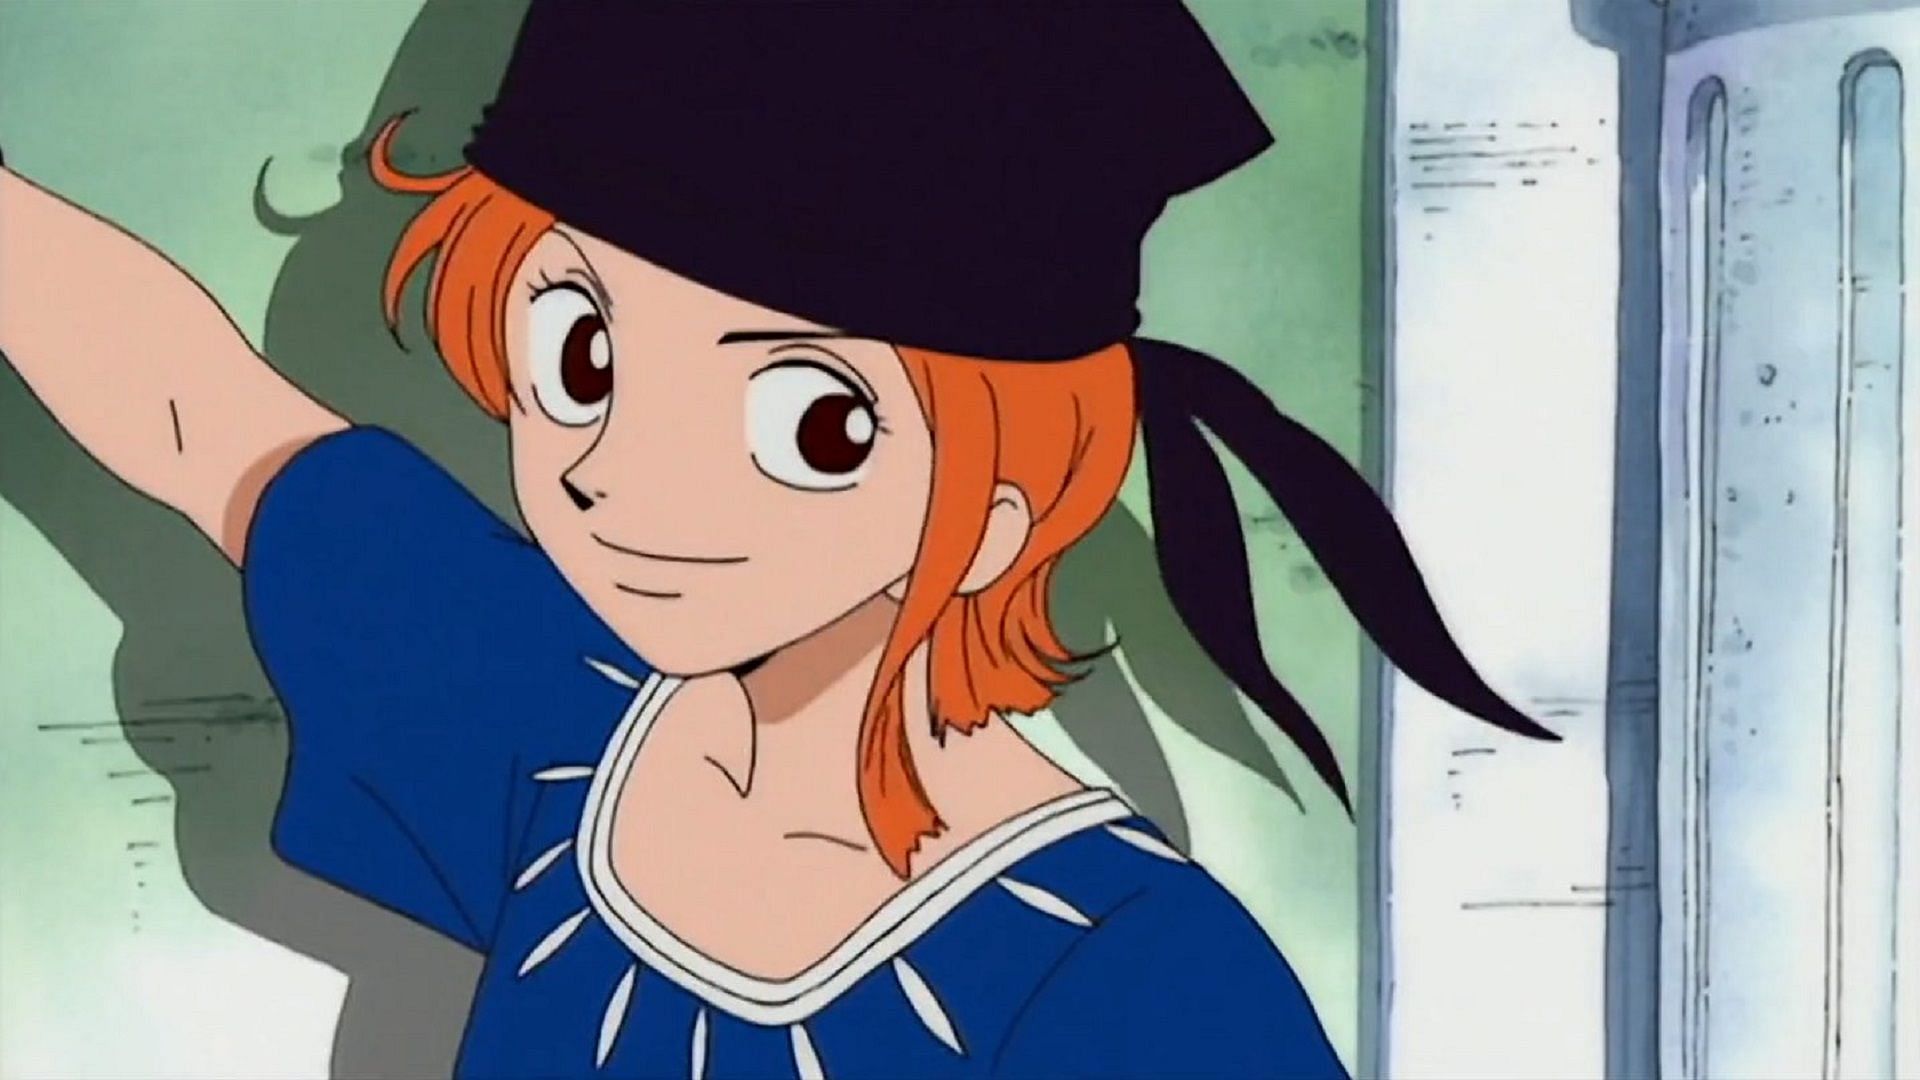 Nami as seen in her first outfit (Image via Toei Animation, One Piece)